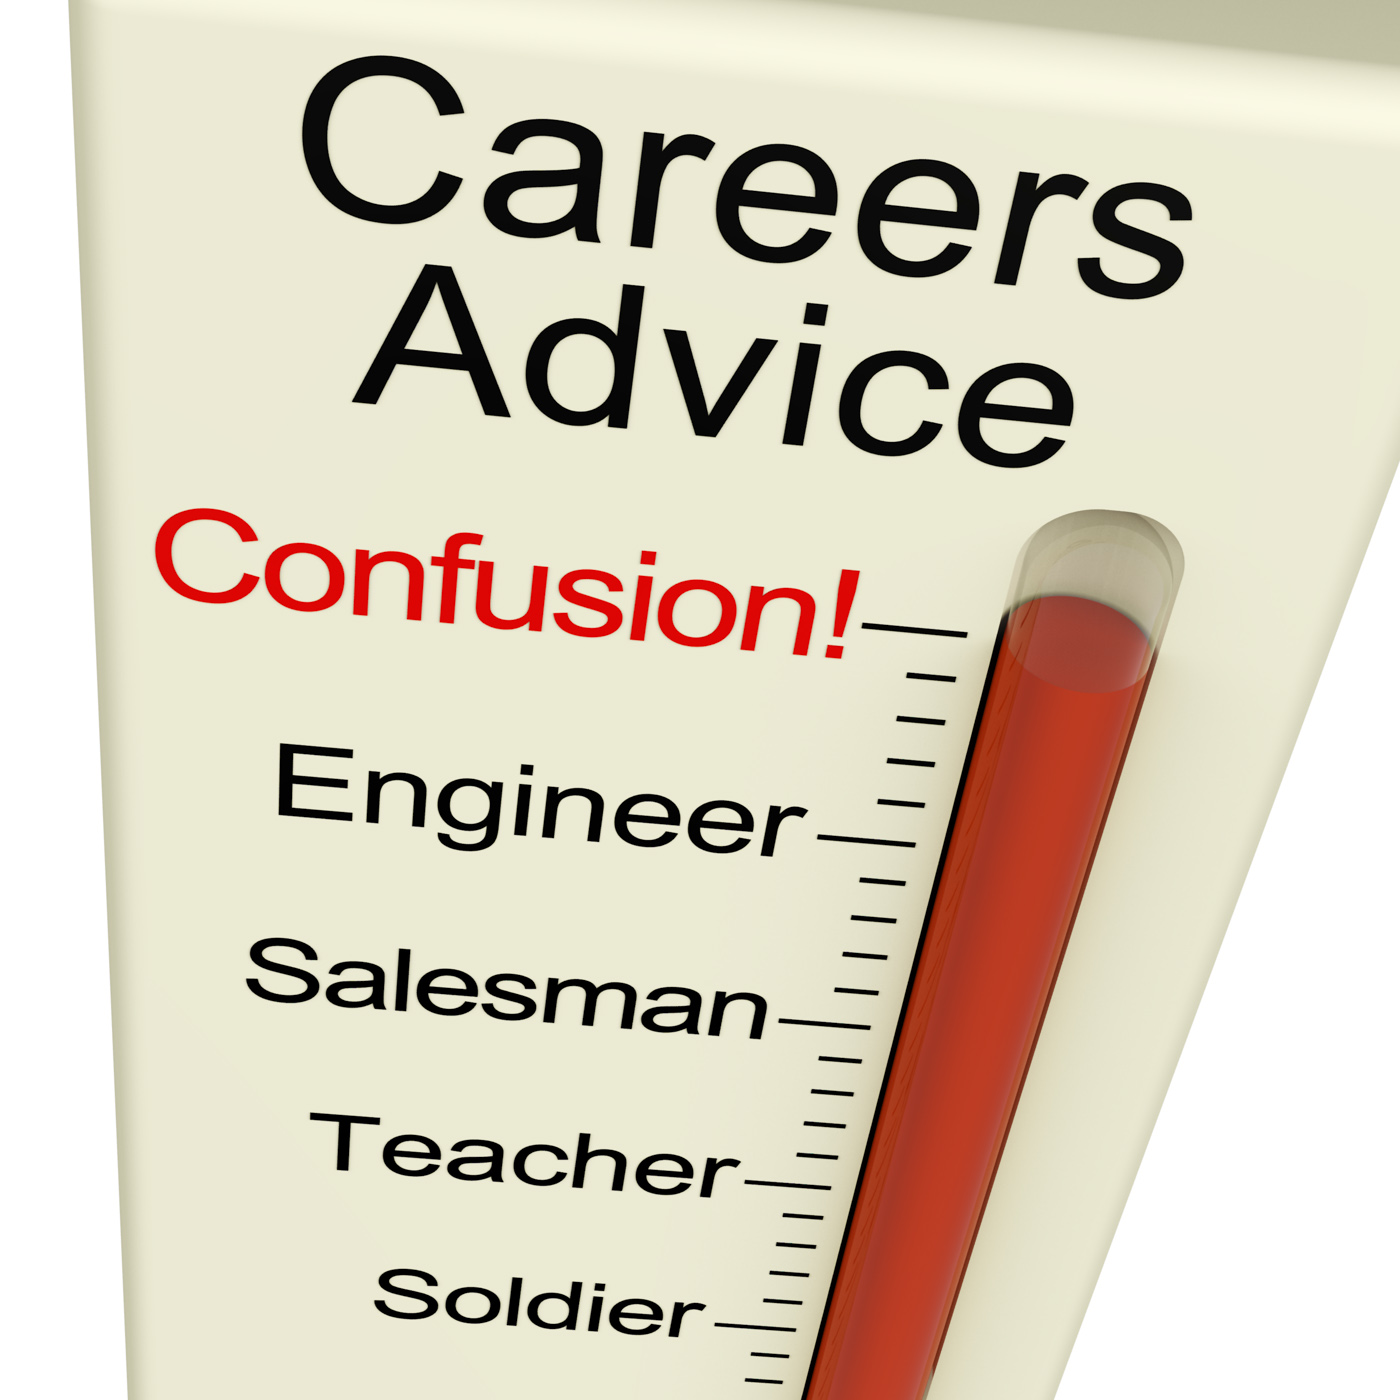 Careers Advice Monitor Confusion Shows Employment Guidance And Decisio, Advice, Direction, Path, Options, HQ Photo